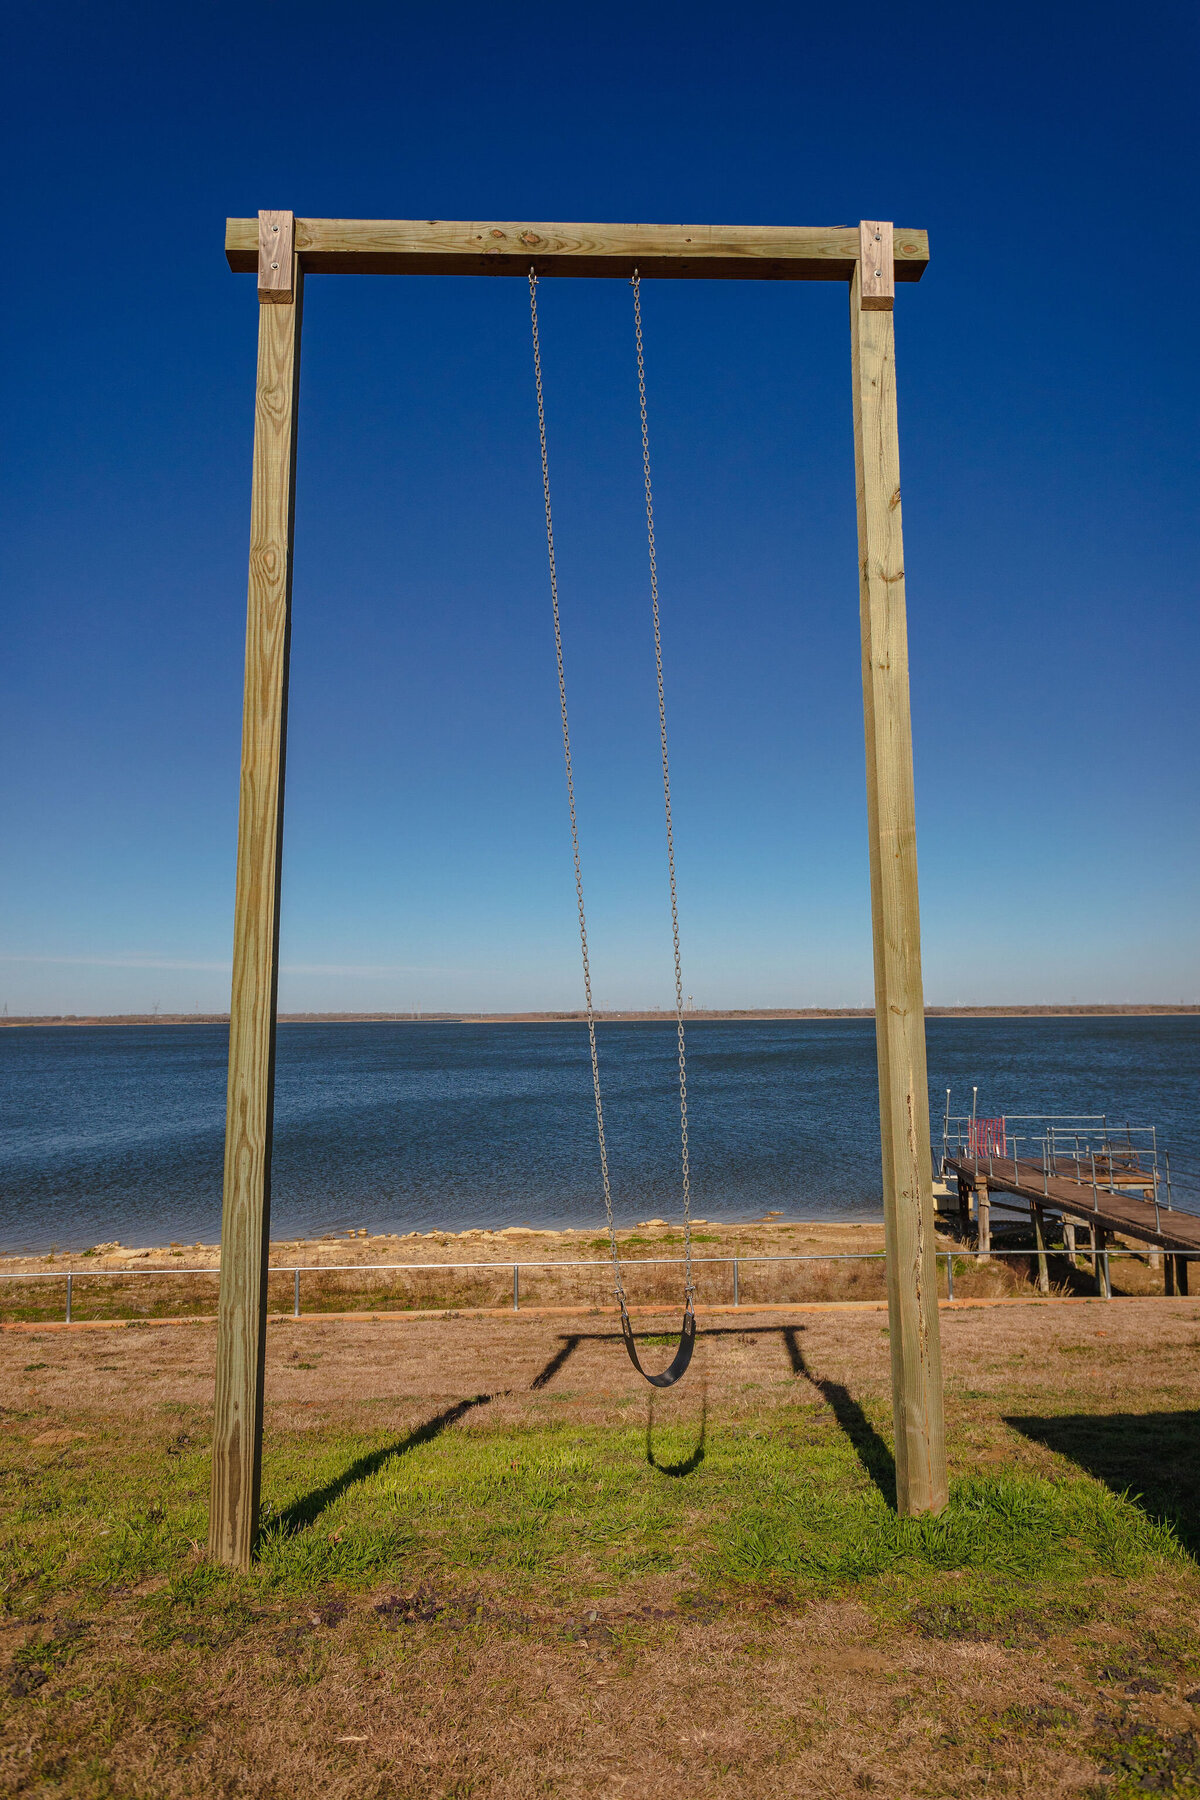 Outdoor swing area overlooking Tradinghouse Lake at this 2-bedroom, 2-bathroom lakeside vacation rental home for 6 guests on Tradinghouse Lake with privacy access to a fishing dock and boat launch pad, ping pong table, gazebo, free wifi and free parking in Waco, TX.